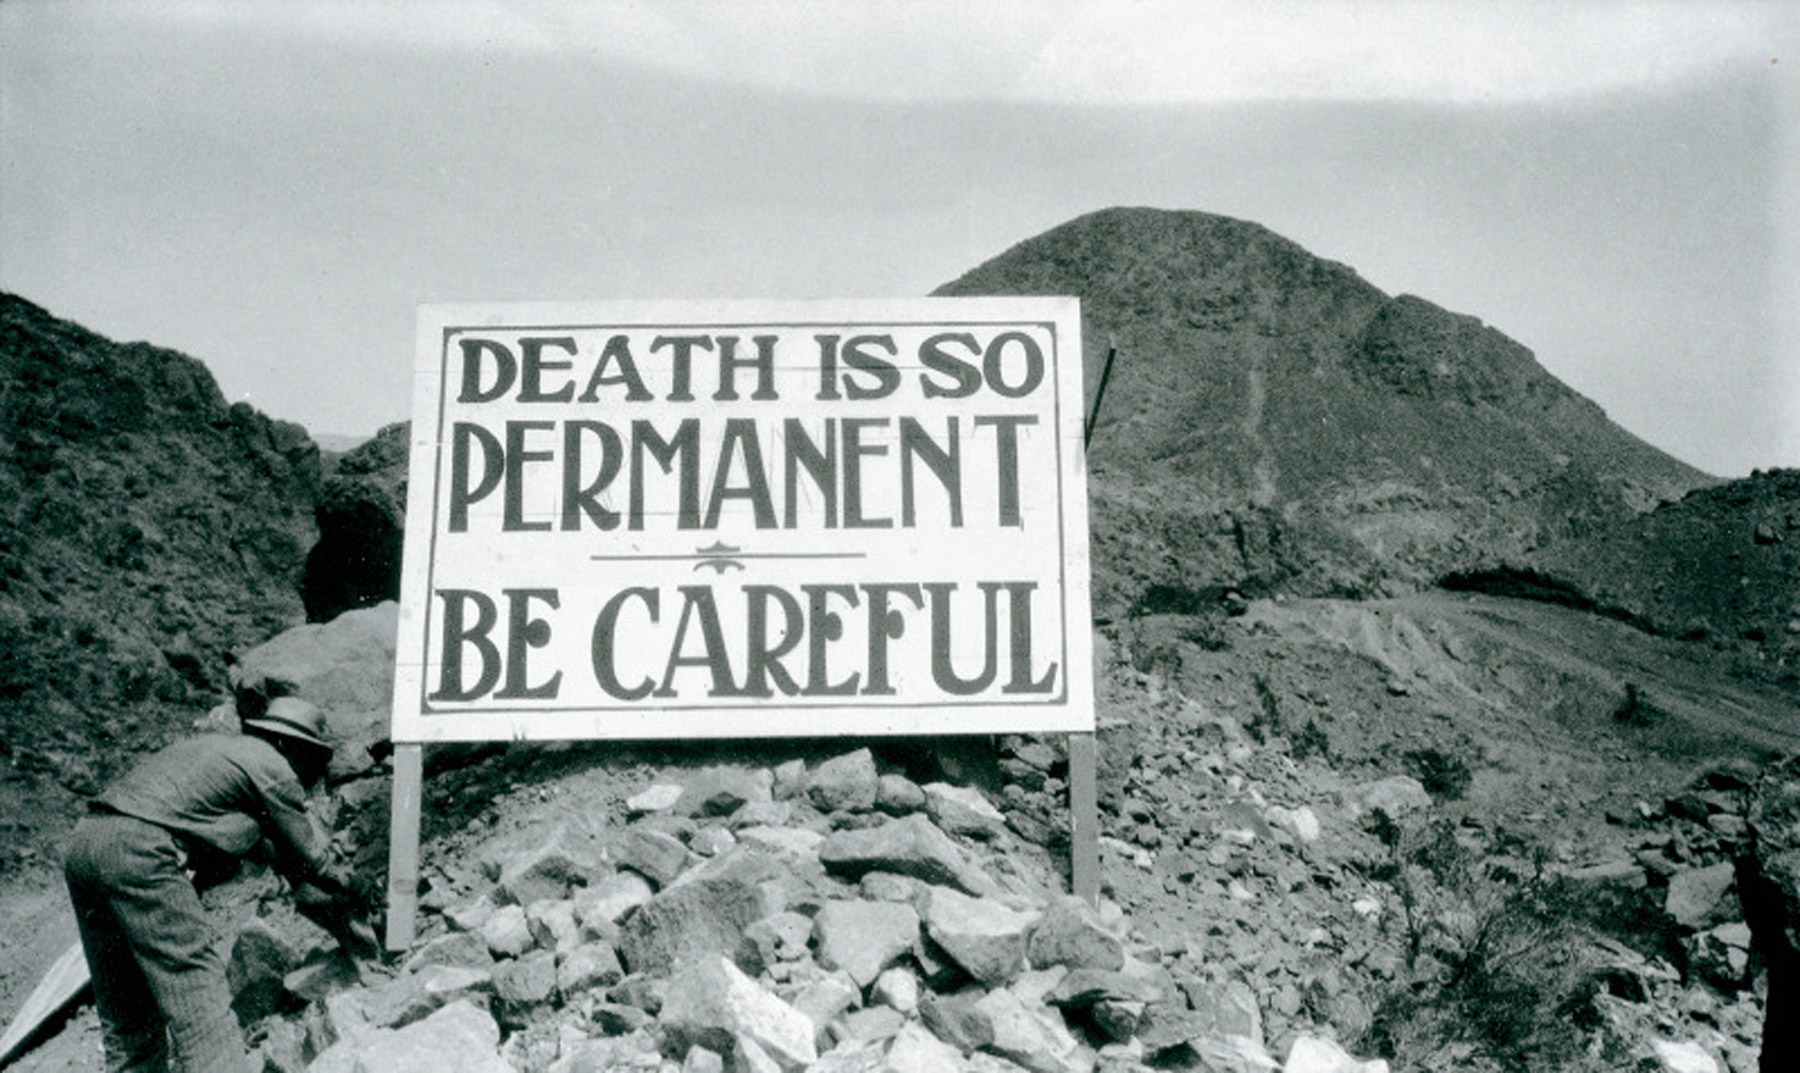 A photograph of a sign that reads “Death is so permanent. Be careful.” The sign was erected for workers involved in the construction of the Hoover Dam in the early 1930s, a project that resulted in the death of hundreds of workers.